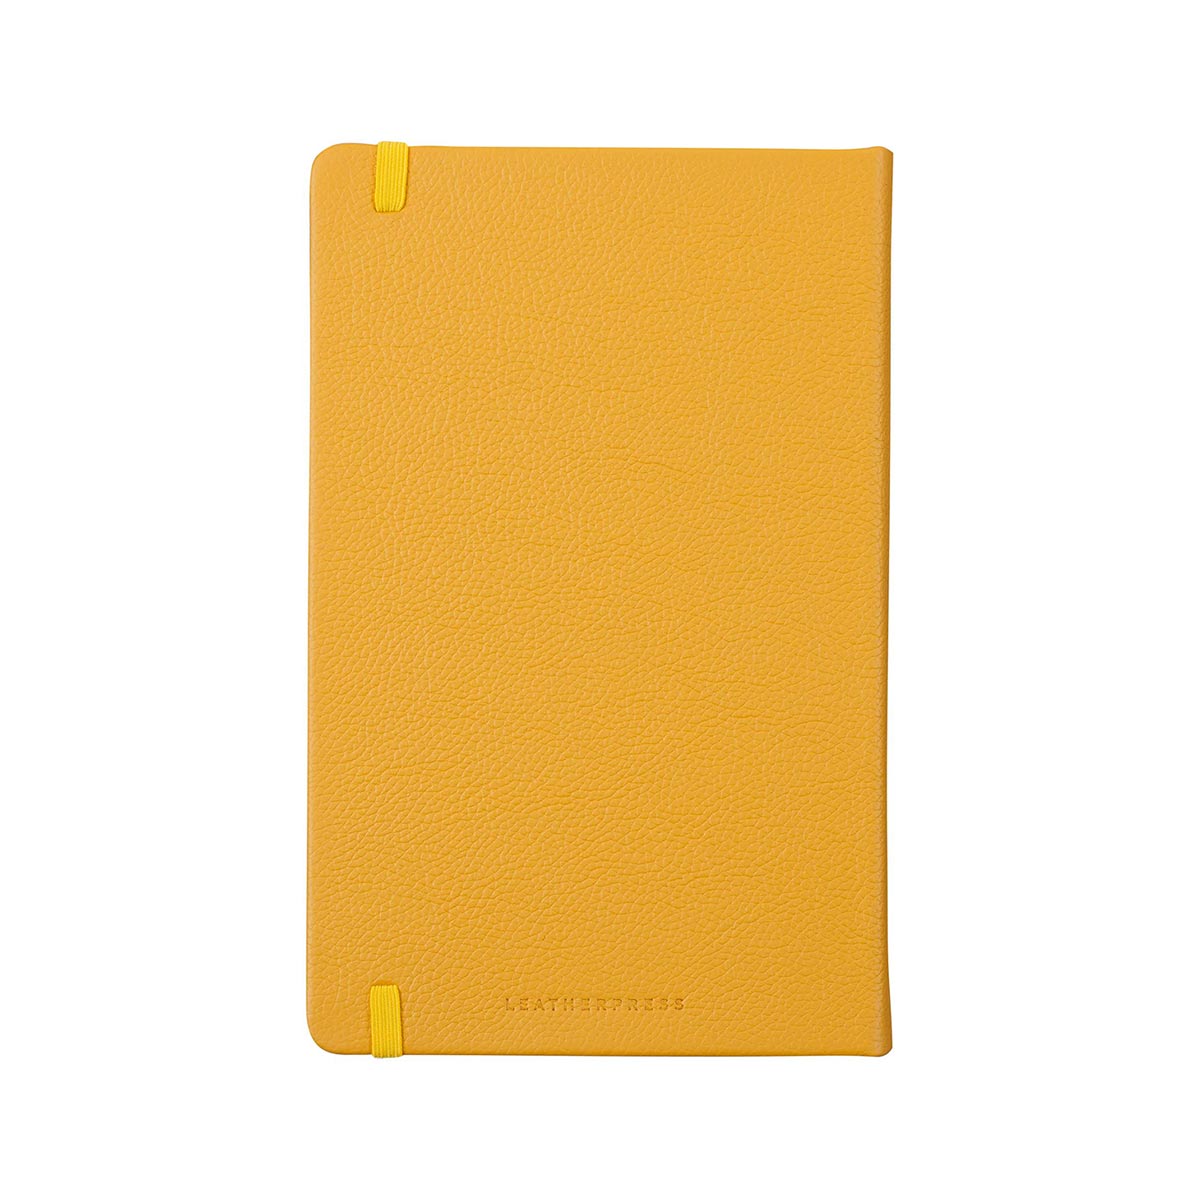 Back cover of Large Butter Yellow notebook with debossed Leatherpress name logo